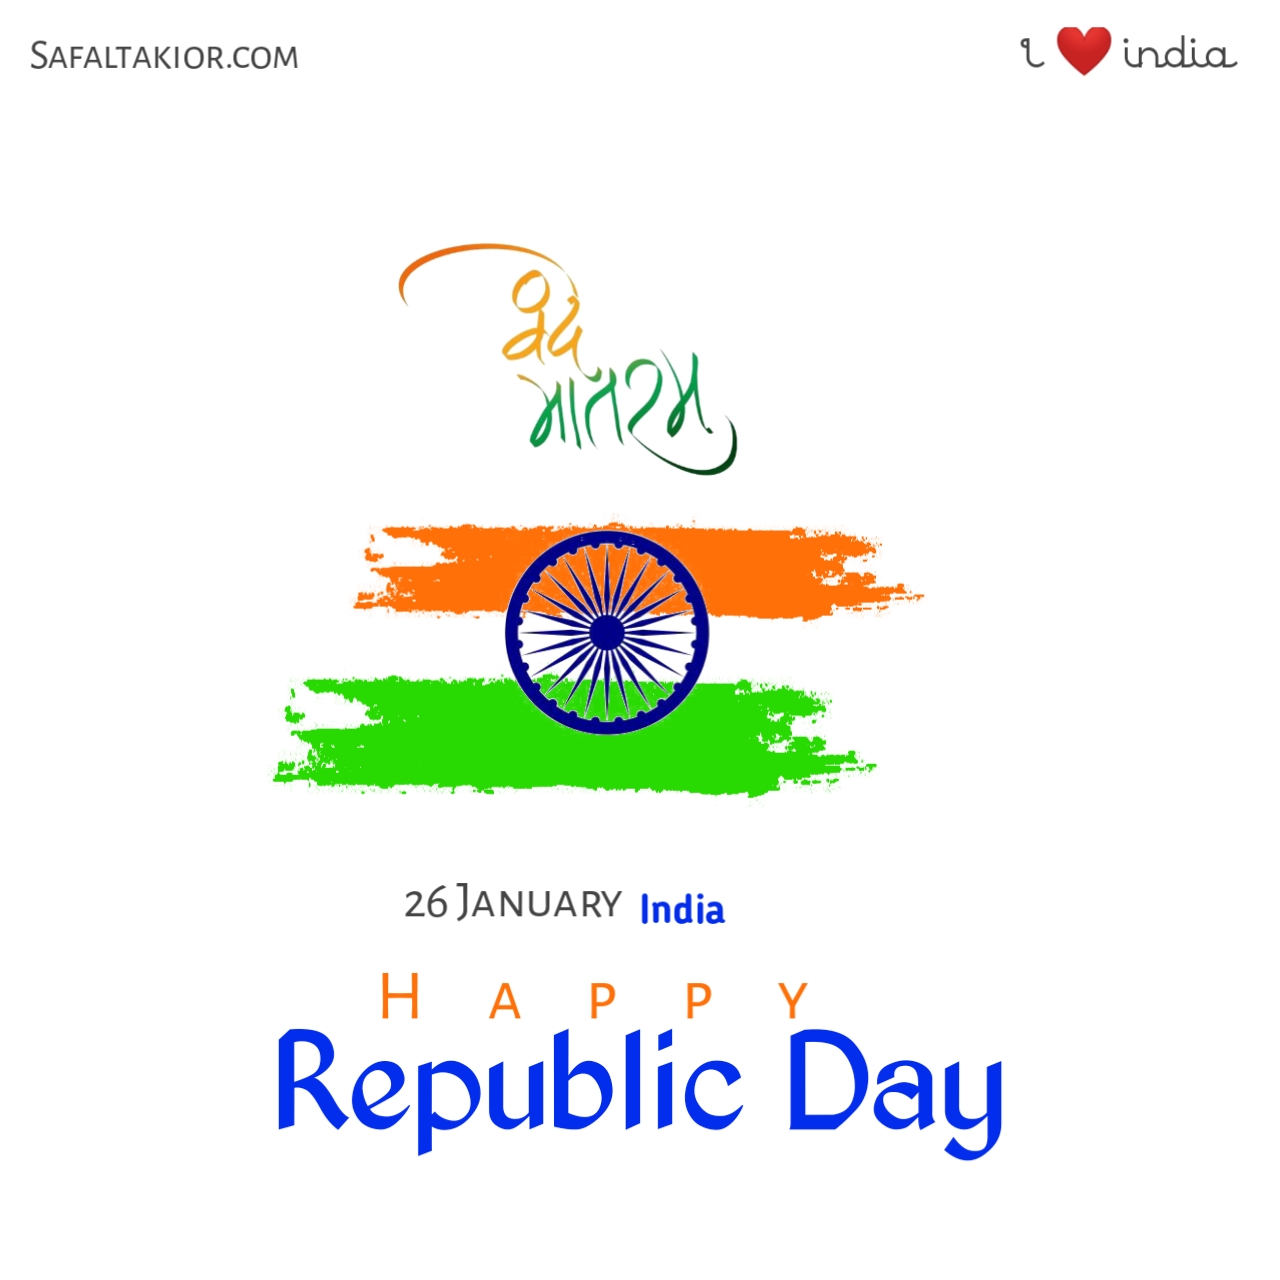  Happy Republic Day celebration concept with illustration of fighter jets and wavy Indian flag colors on white background.